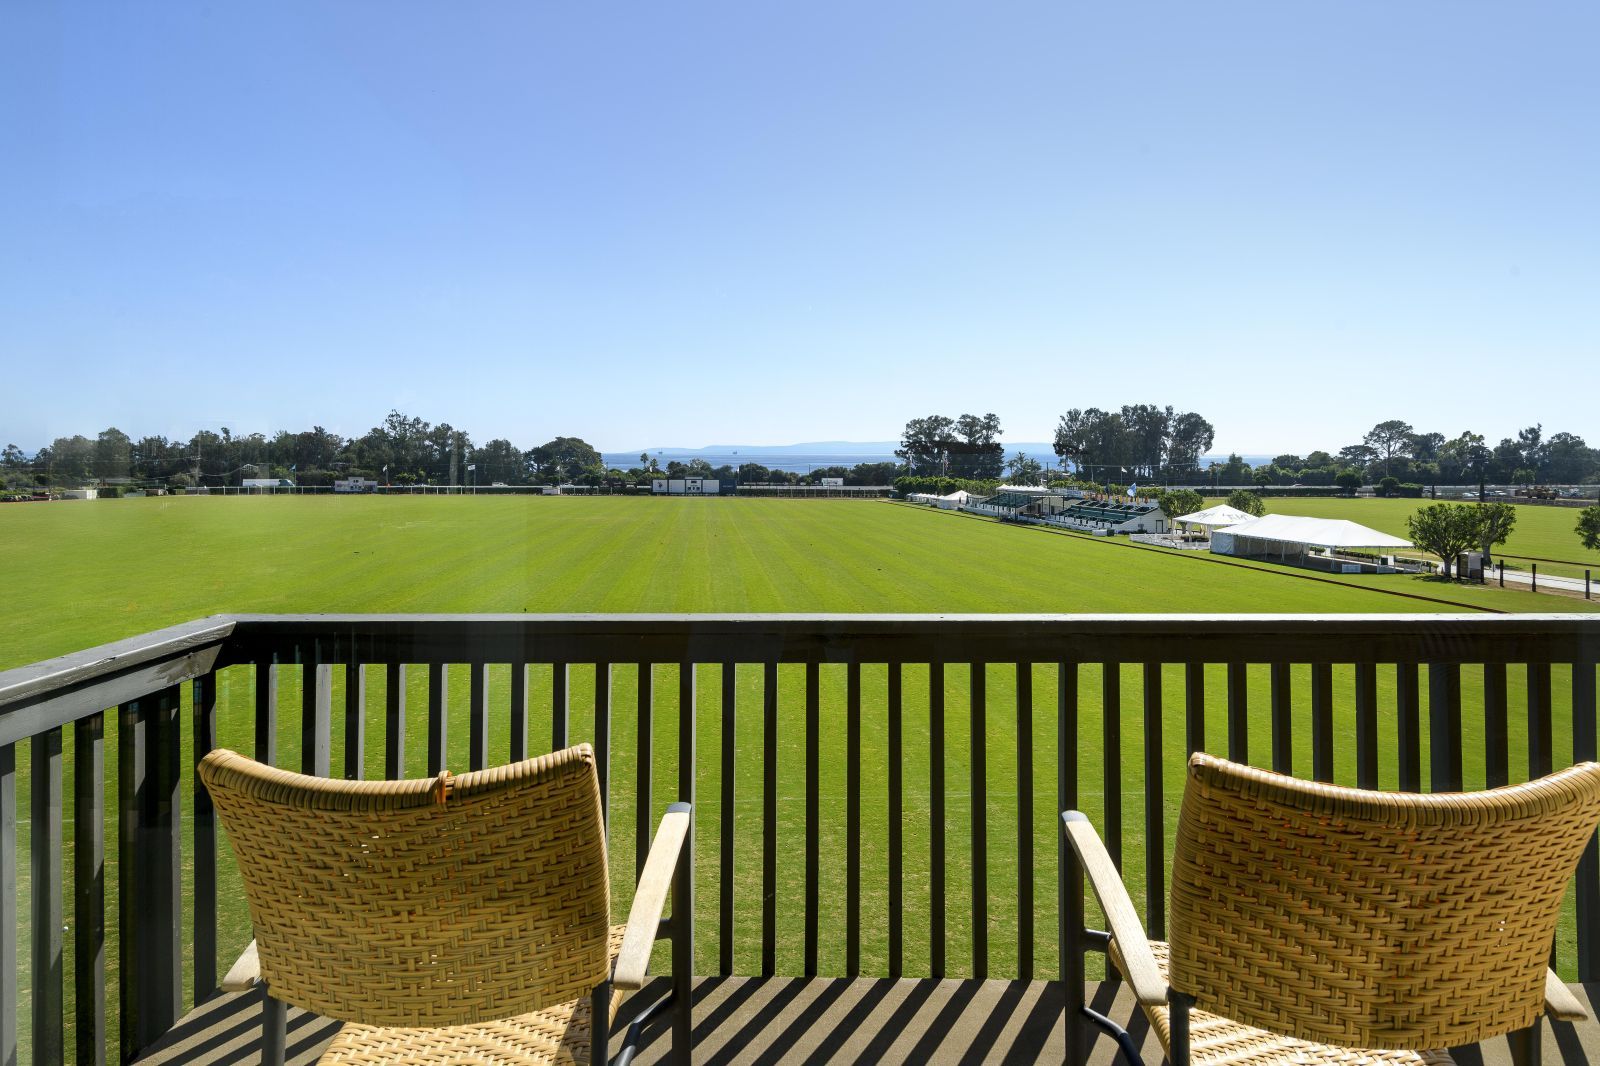 Two chairs on a balcony overlooking the Santa Barbara Polo & Racquet Club polo field, with the ocean and blue sky in the background.